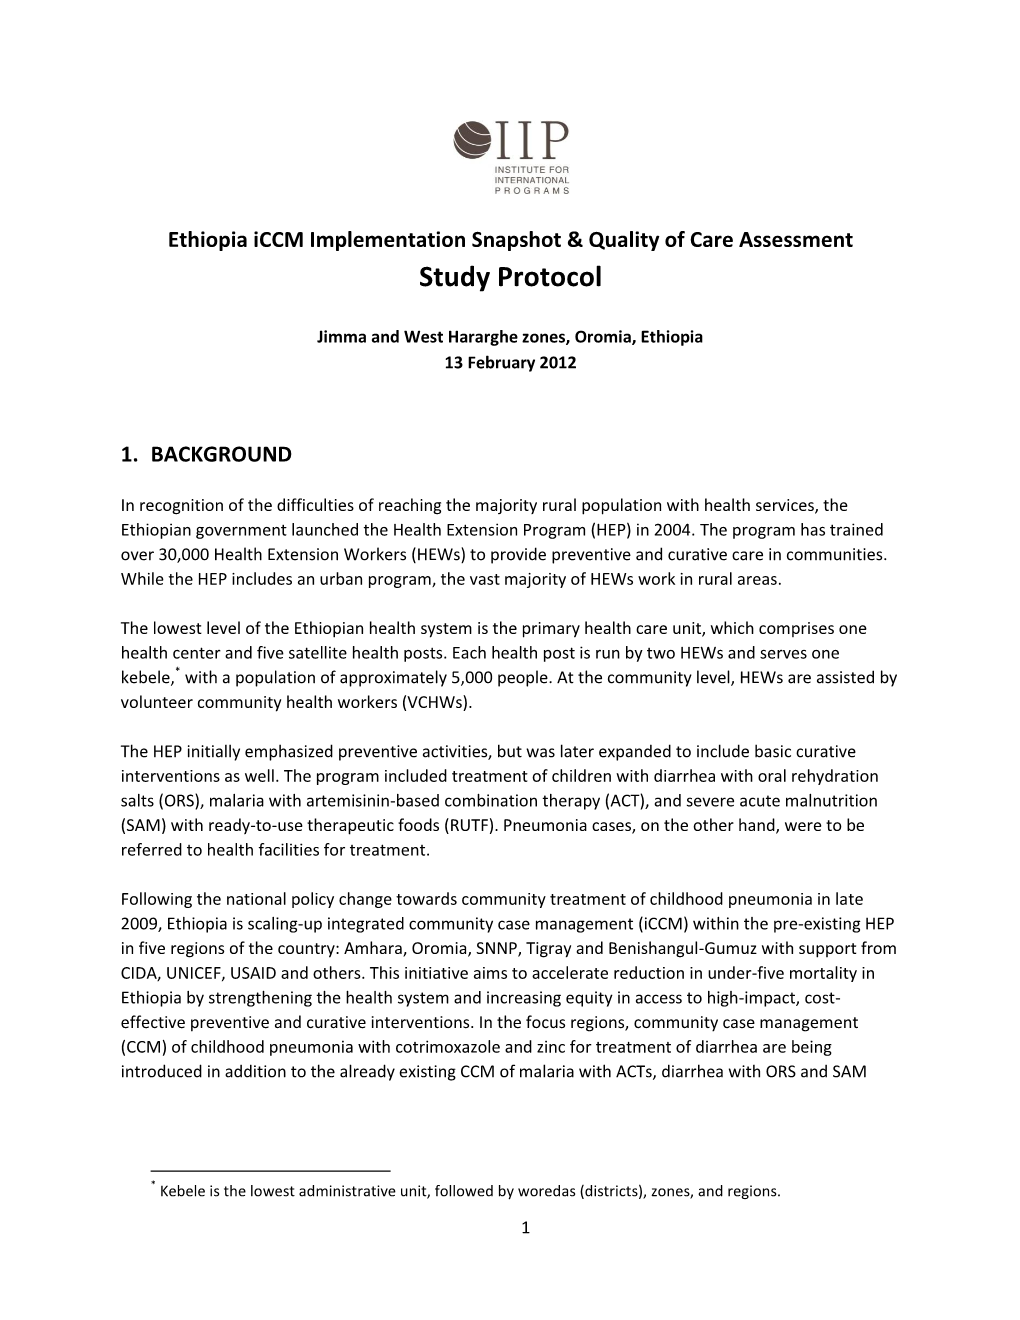 Ethiopia Iccm Implementation Snapshot & Quality of Care Assessment Study Protocol